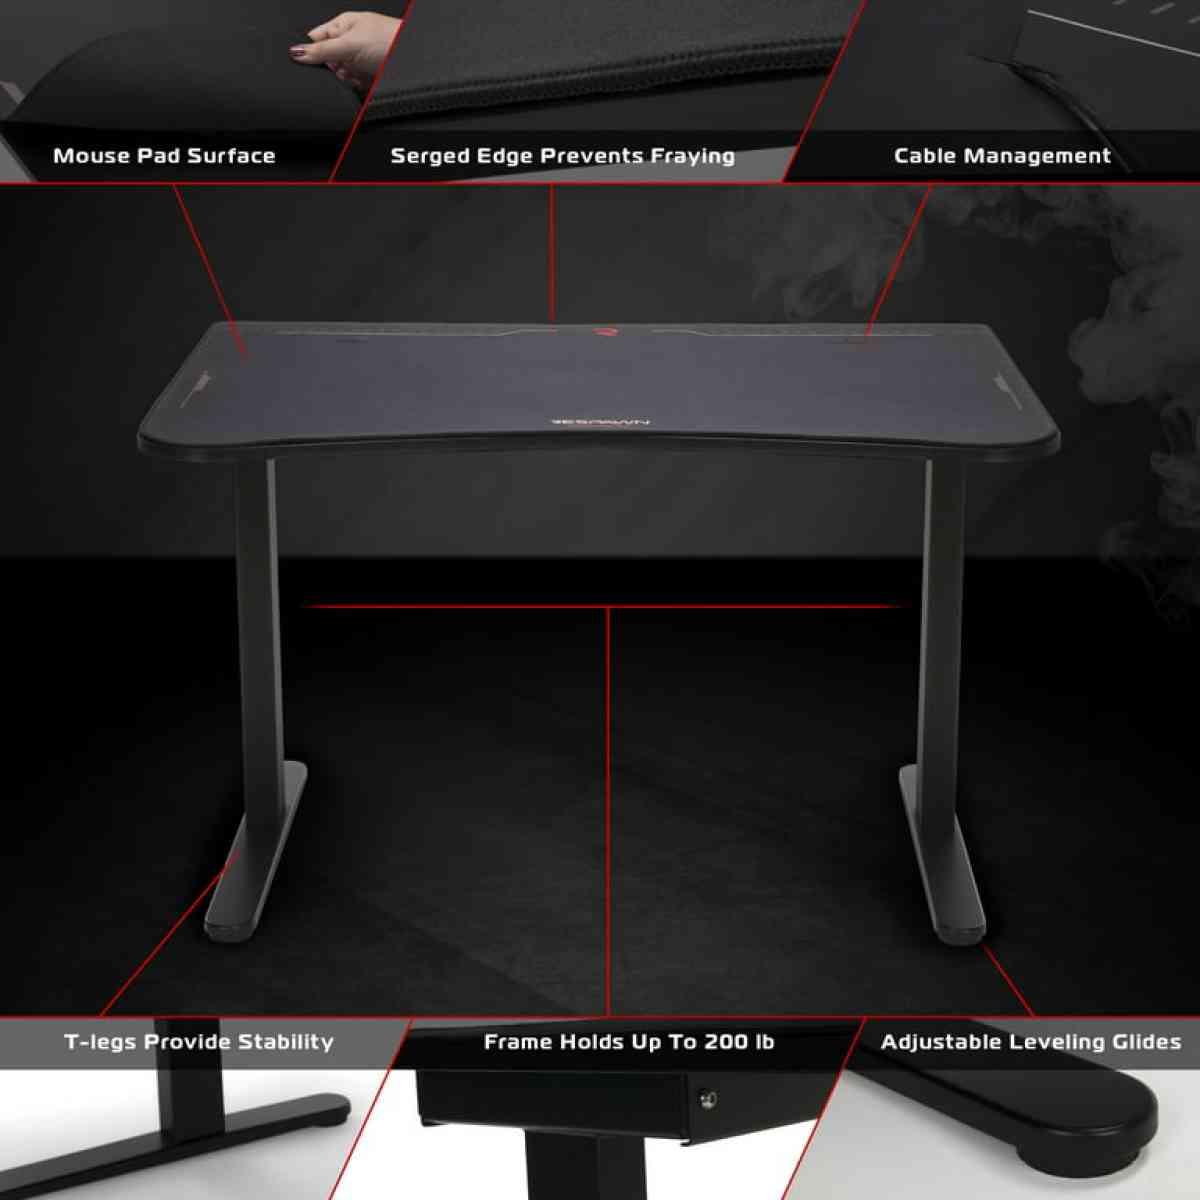 Respawn Rsp1048 48 inch Gaming Table with Gaming Mouse Pad